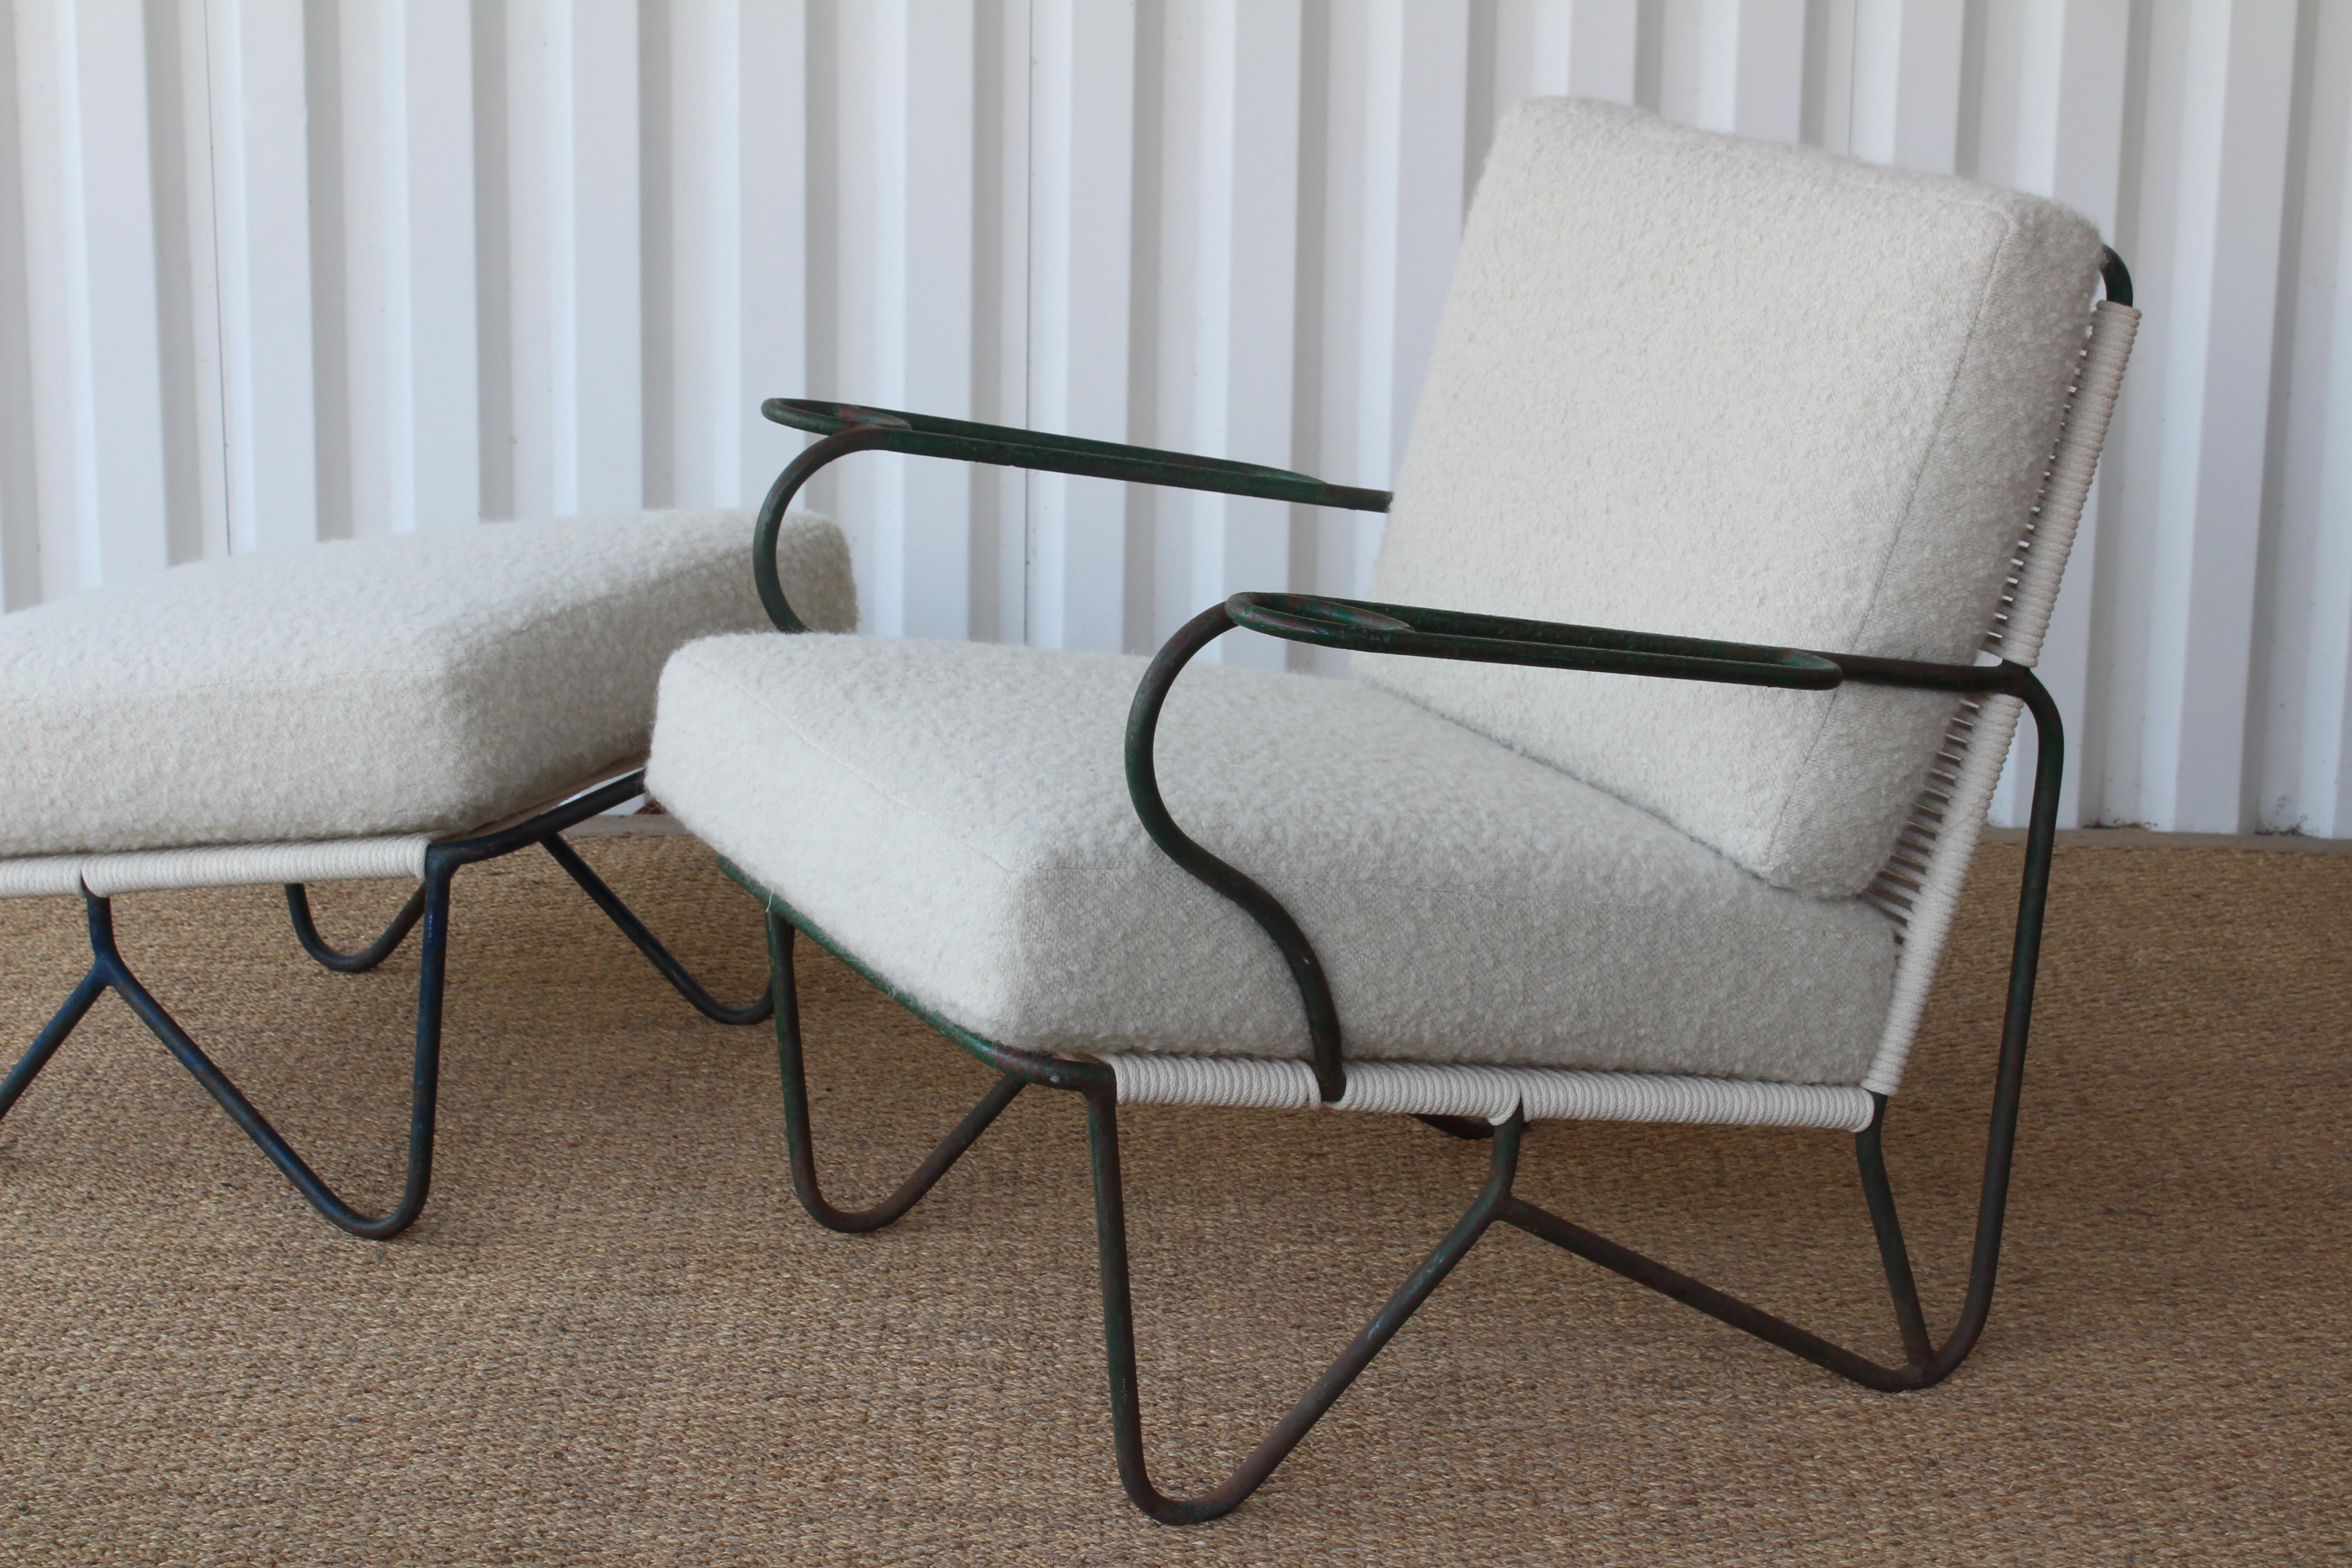 American Iron Lounge Chair and Ottoman in Alpaca Boucle Upholstery, U.S.A, 1950s. 